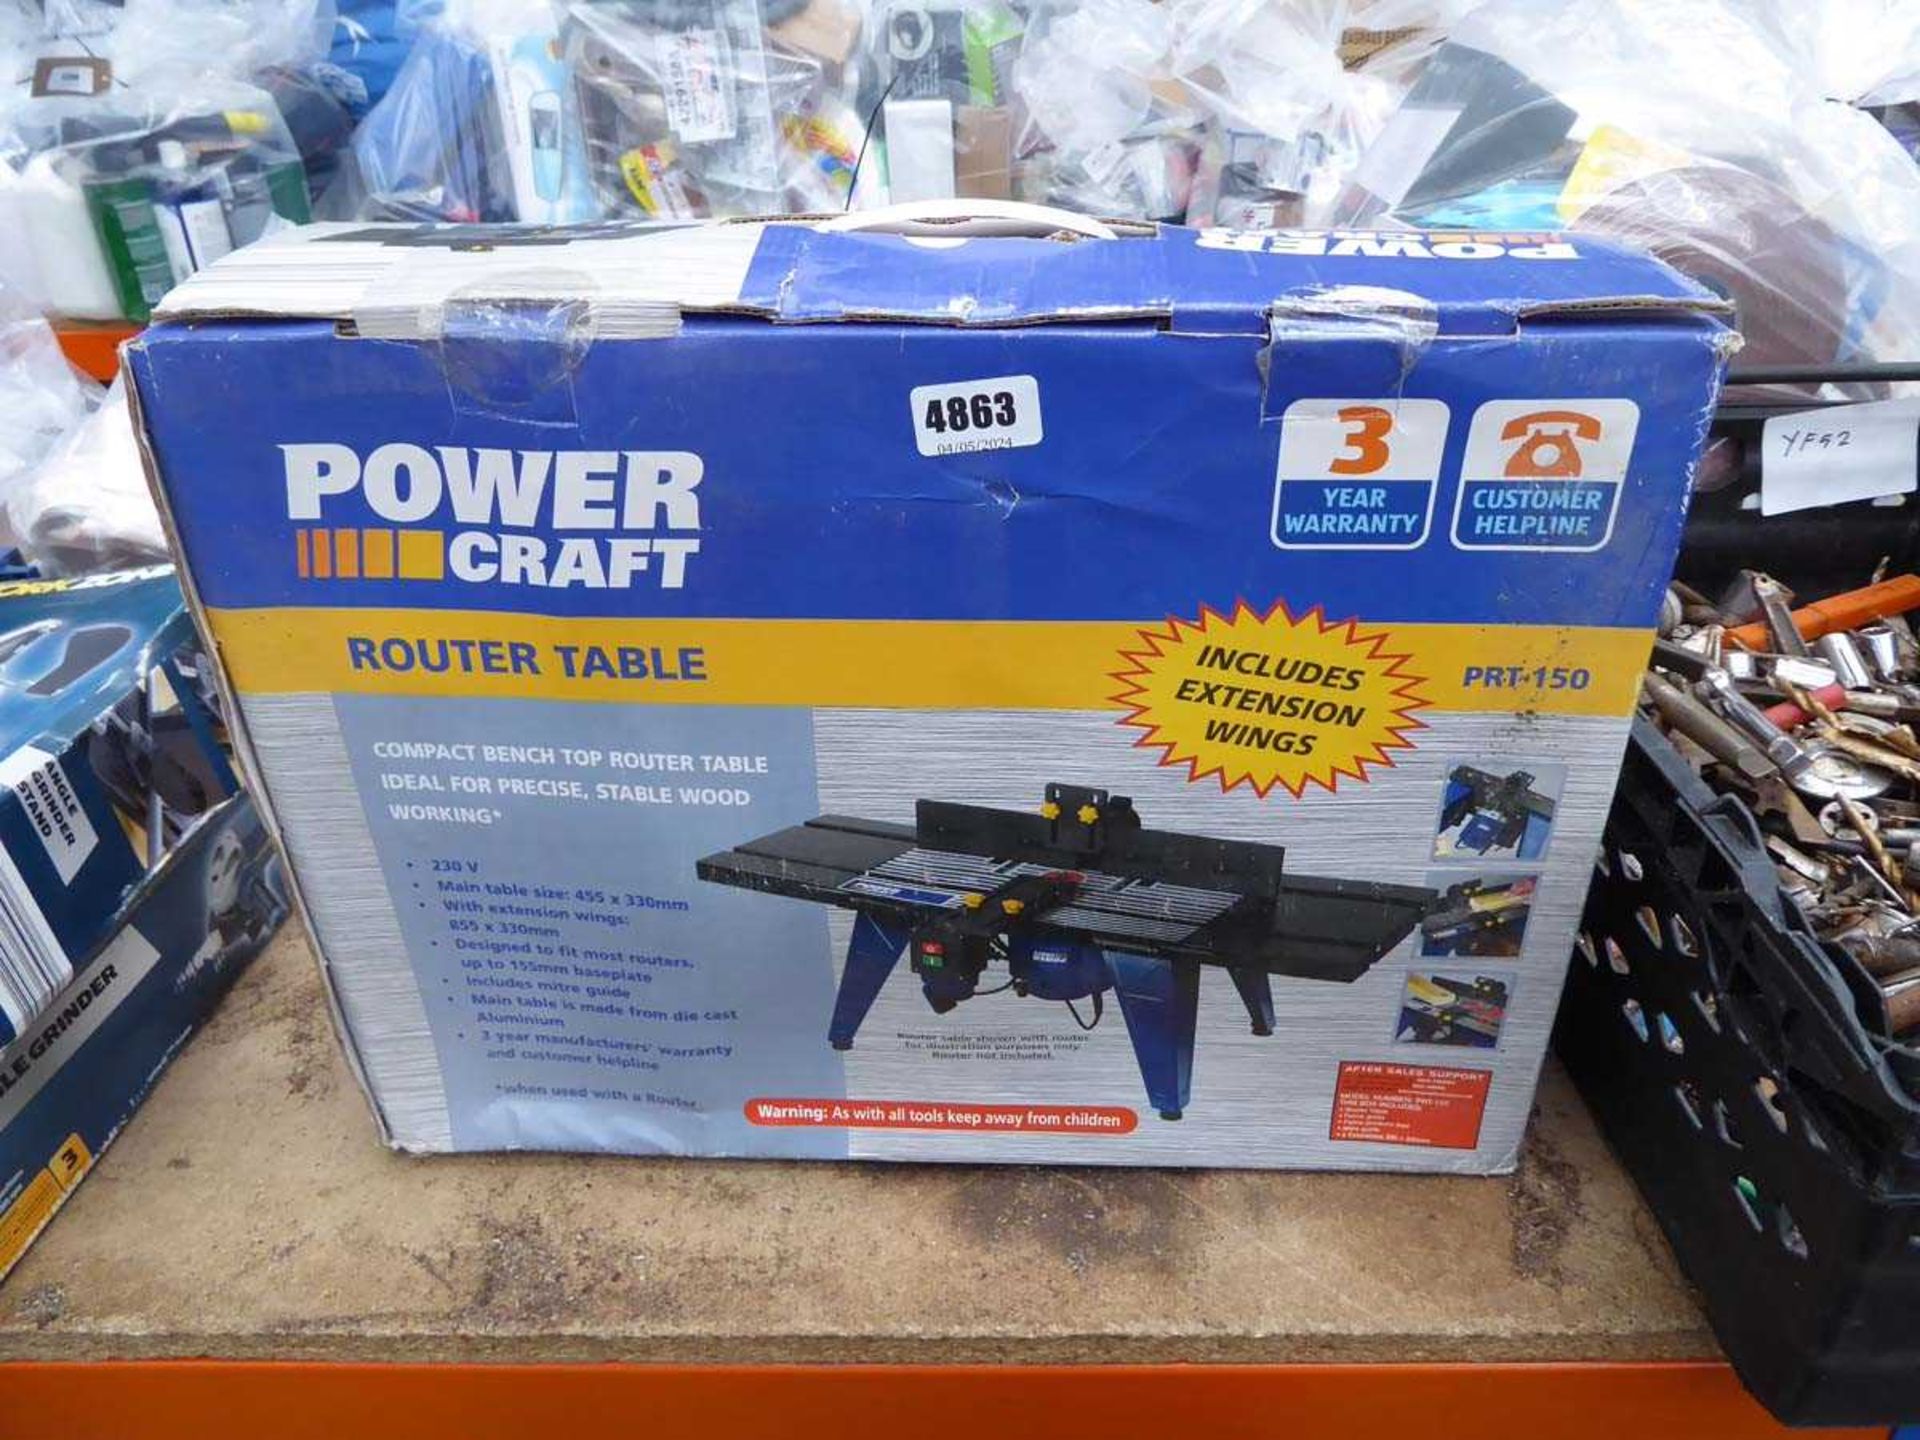 Powercraft router table